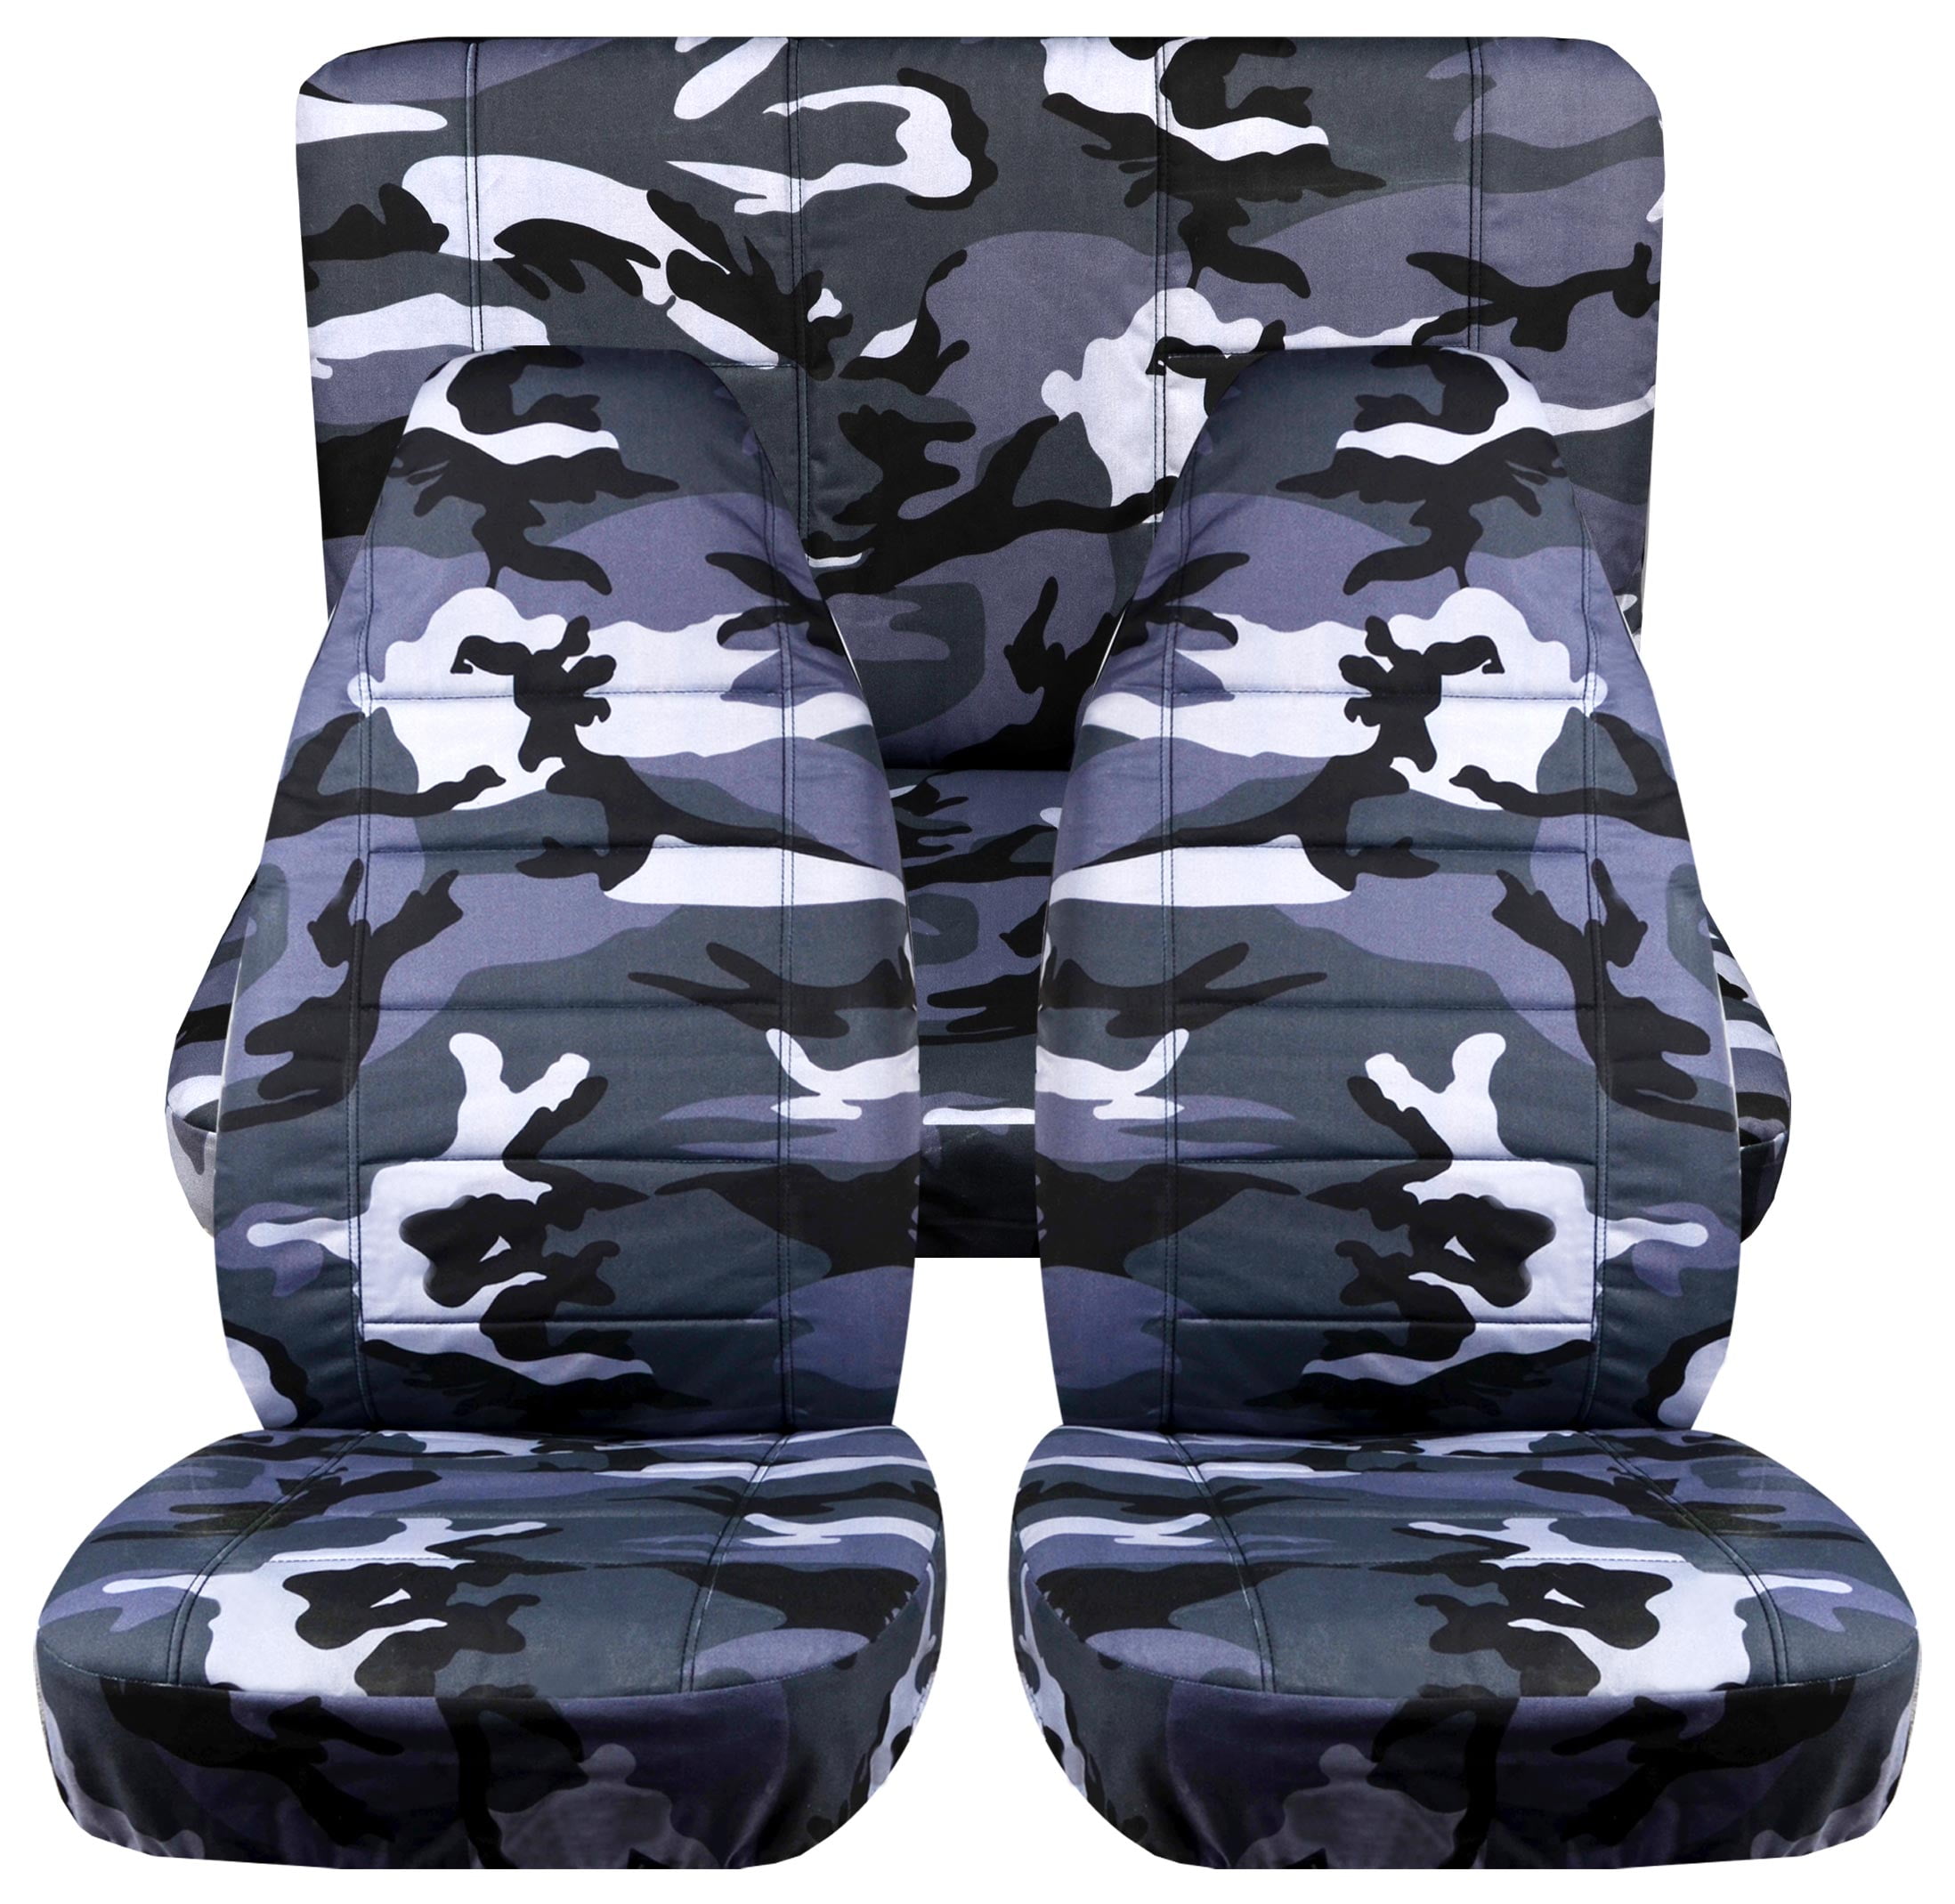 T314-Designcovers Compatible with 1997-2002 Jeep Wrangler TJ  SE,SPORT,SAHARA Camo Seat Covers:Gray Camouflage - Full Set Front&Rear  Front&Rear 